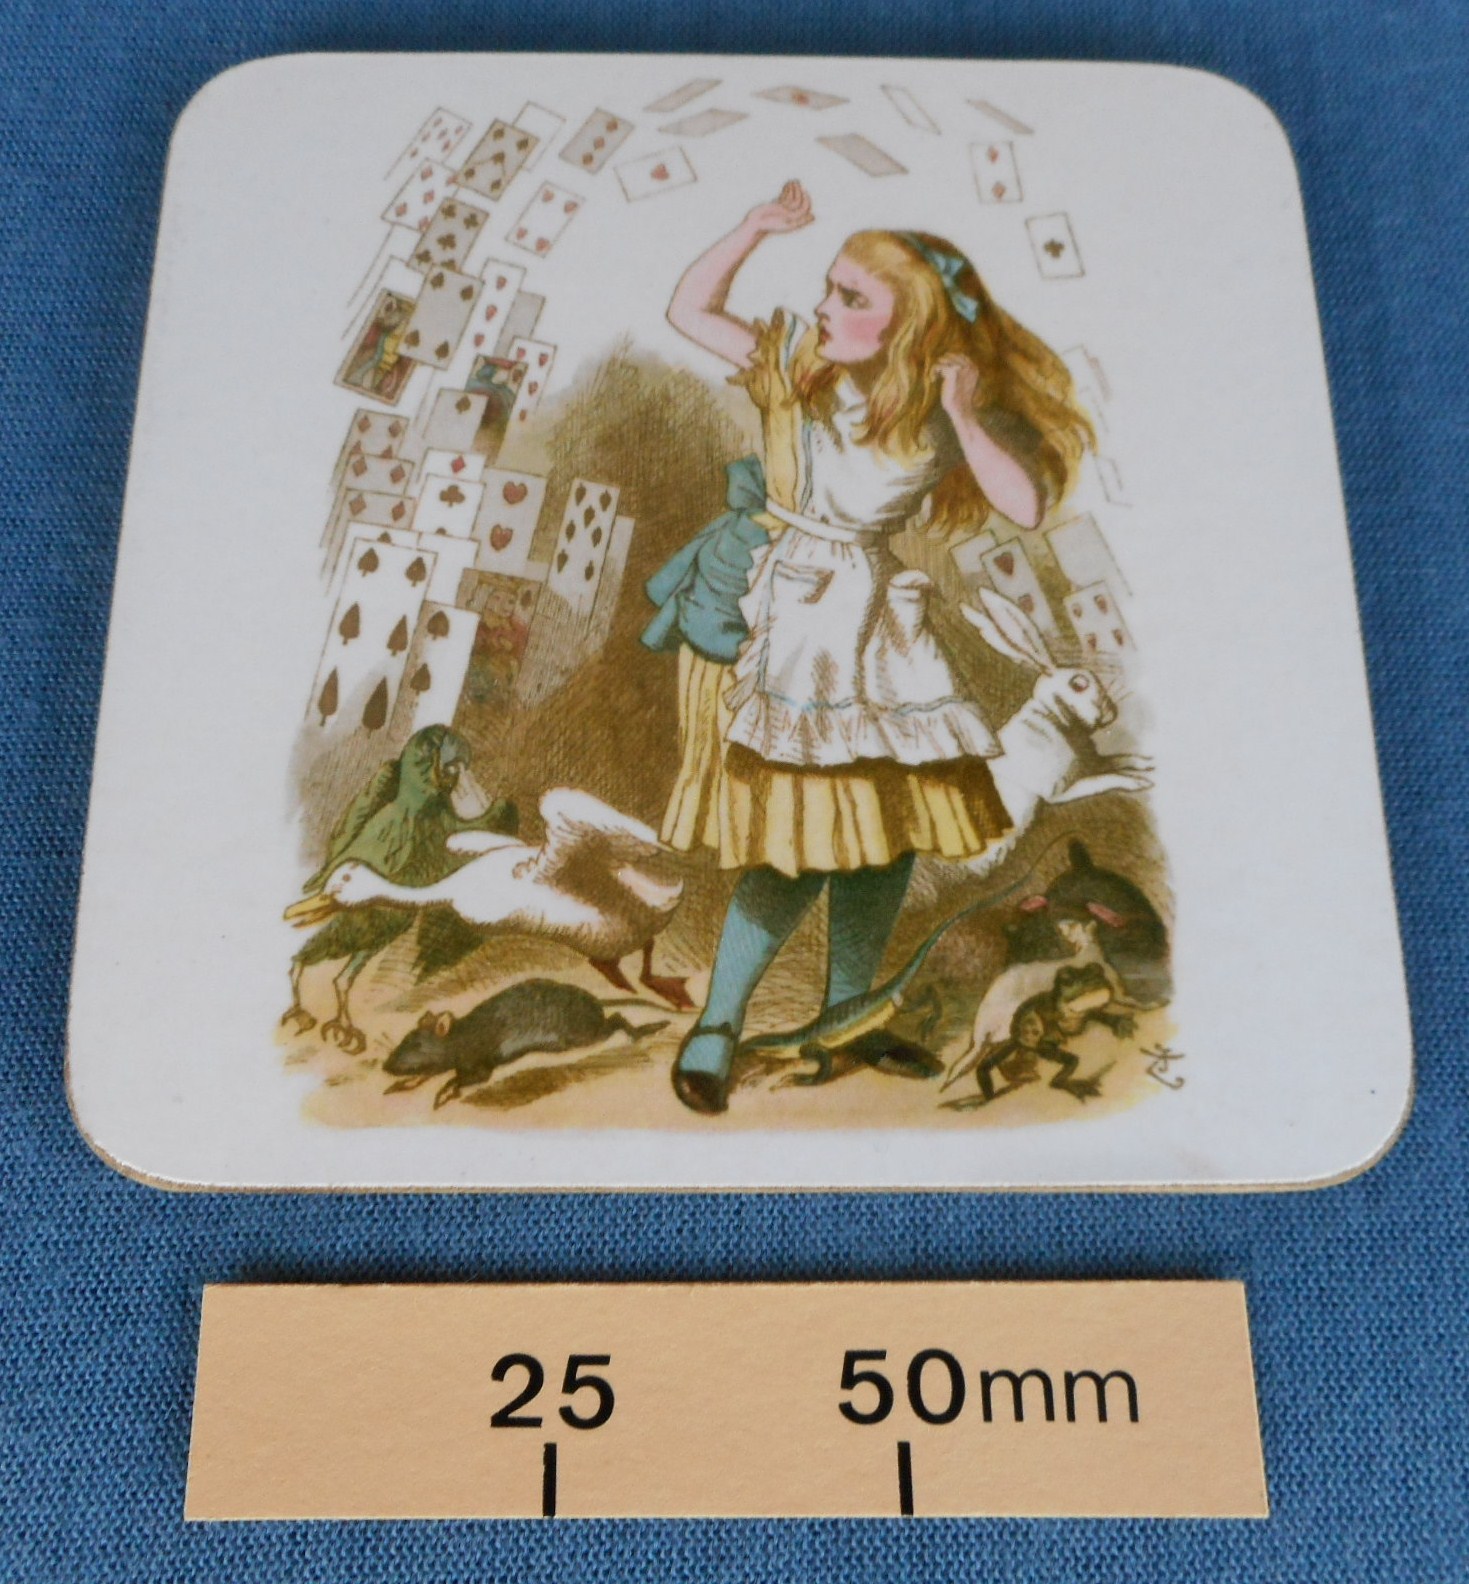 A drinks mat with an image of Alice and the flying cards